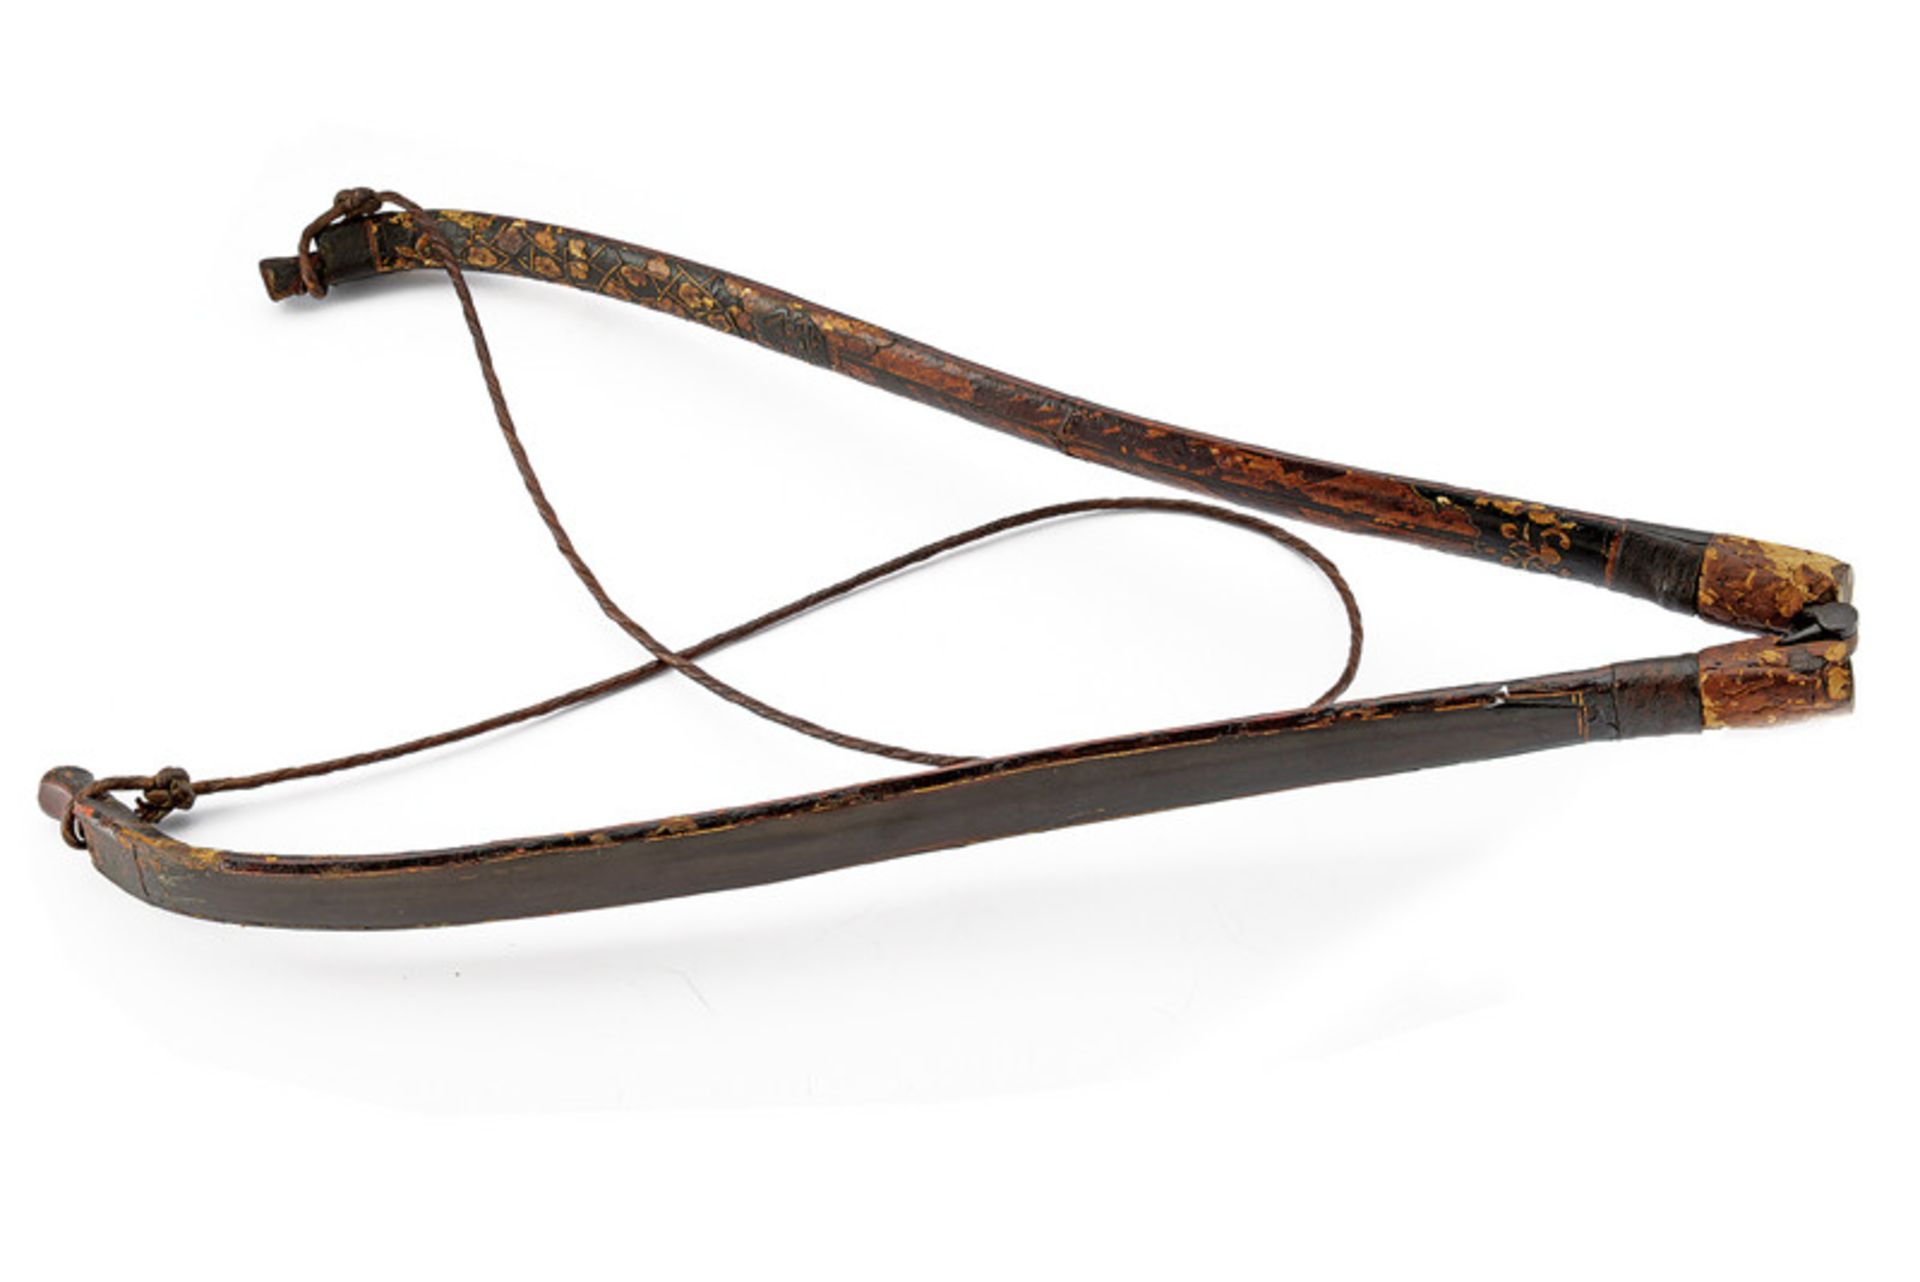 A rare painted folding bow dating: 19th Century provenance: China Wooden bow painted with polychrome - Image 5 of 6